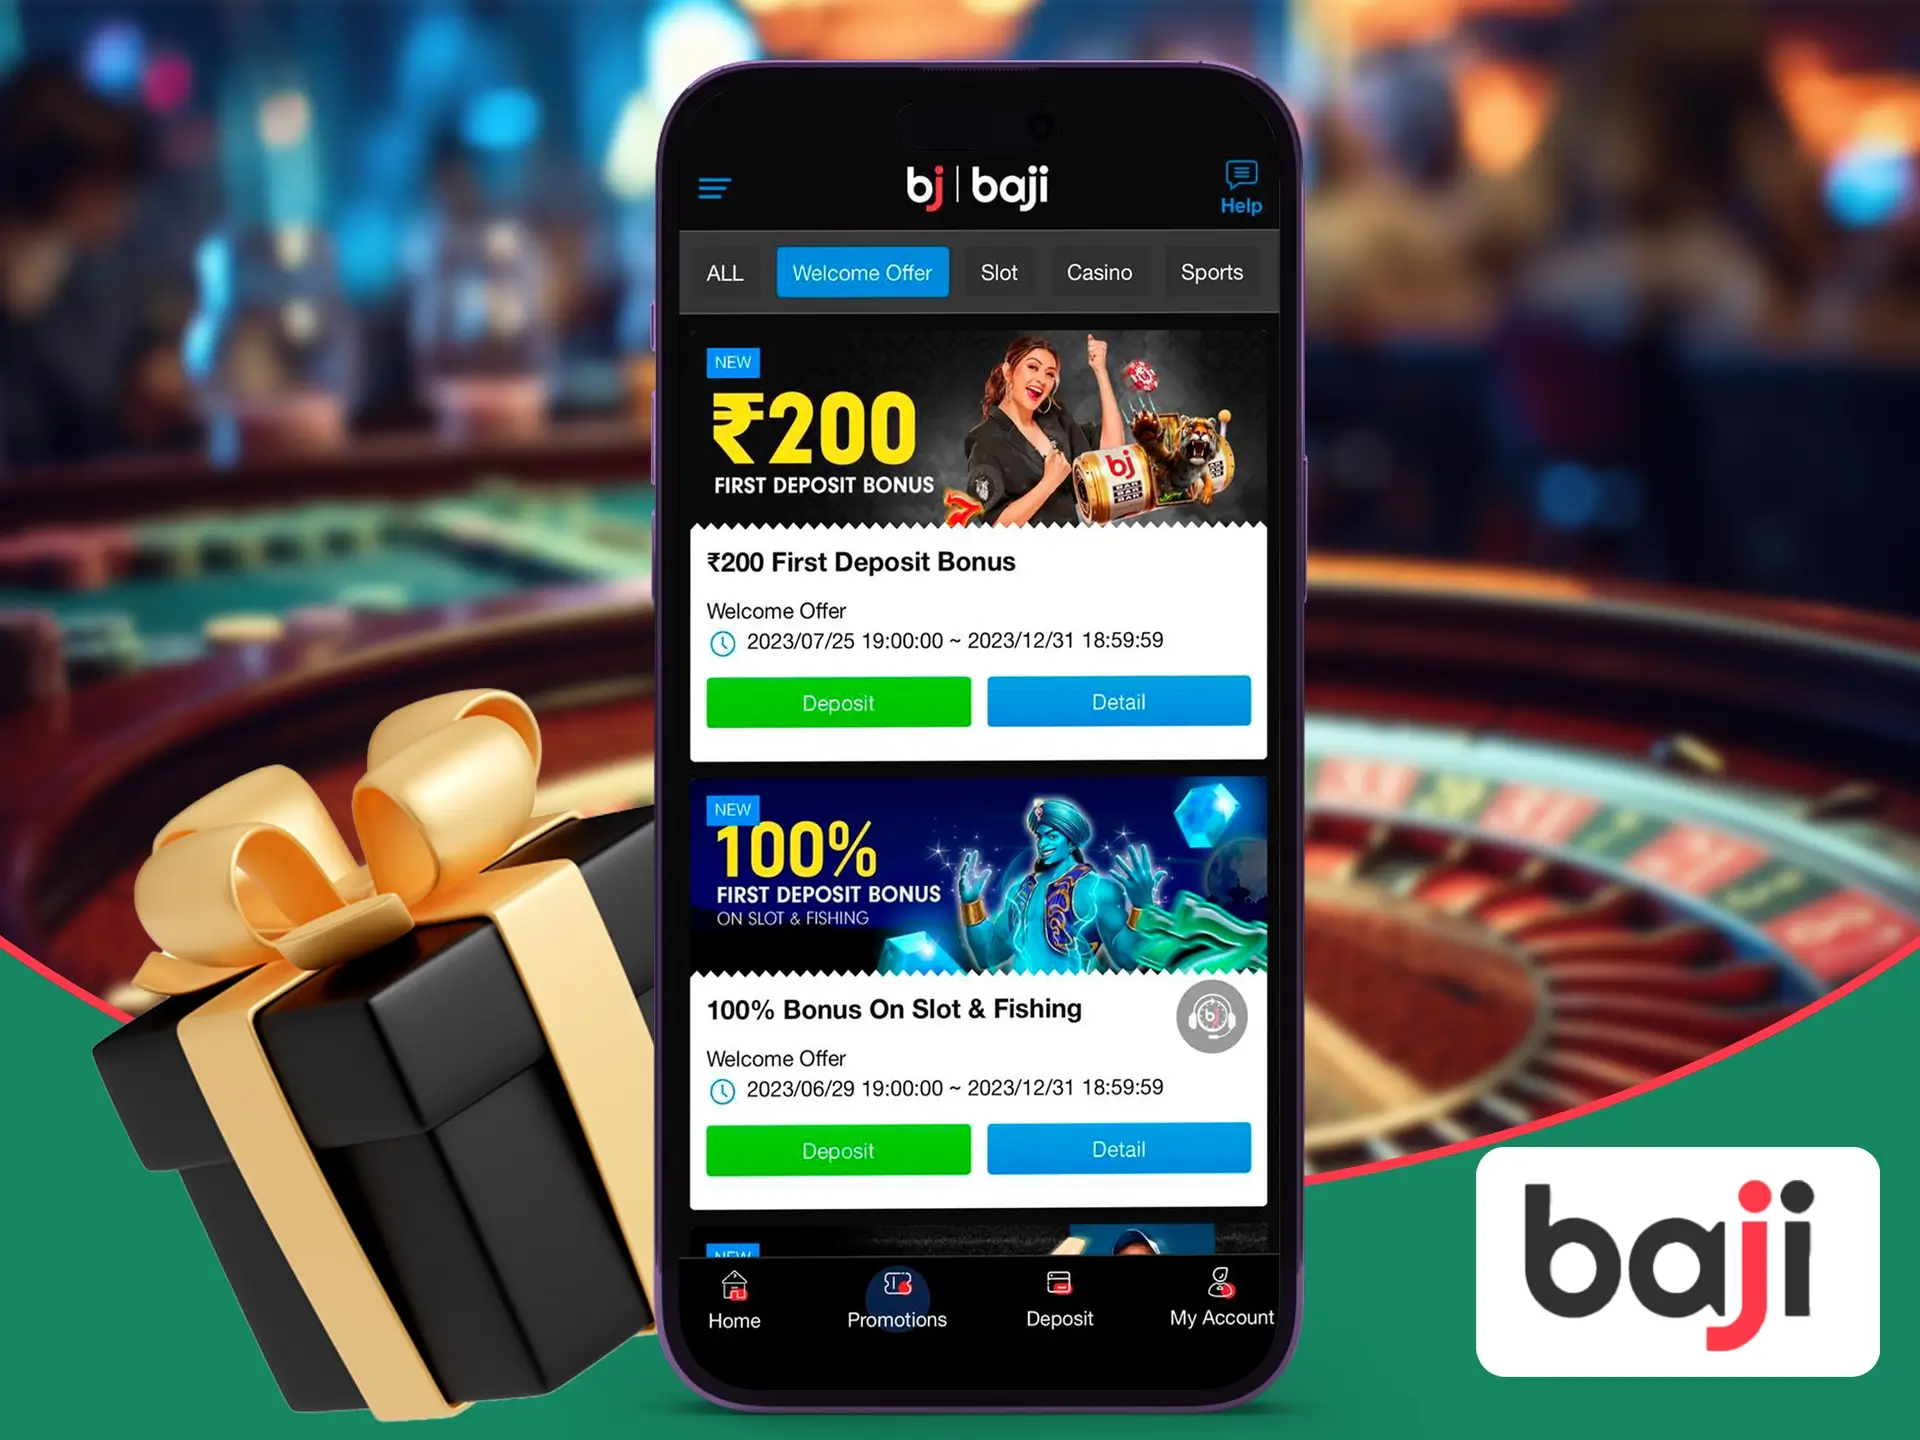 Today almost everyone uses a phone, so Baji has prepared a mobile app for you and a great welcome bonus as a gift.